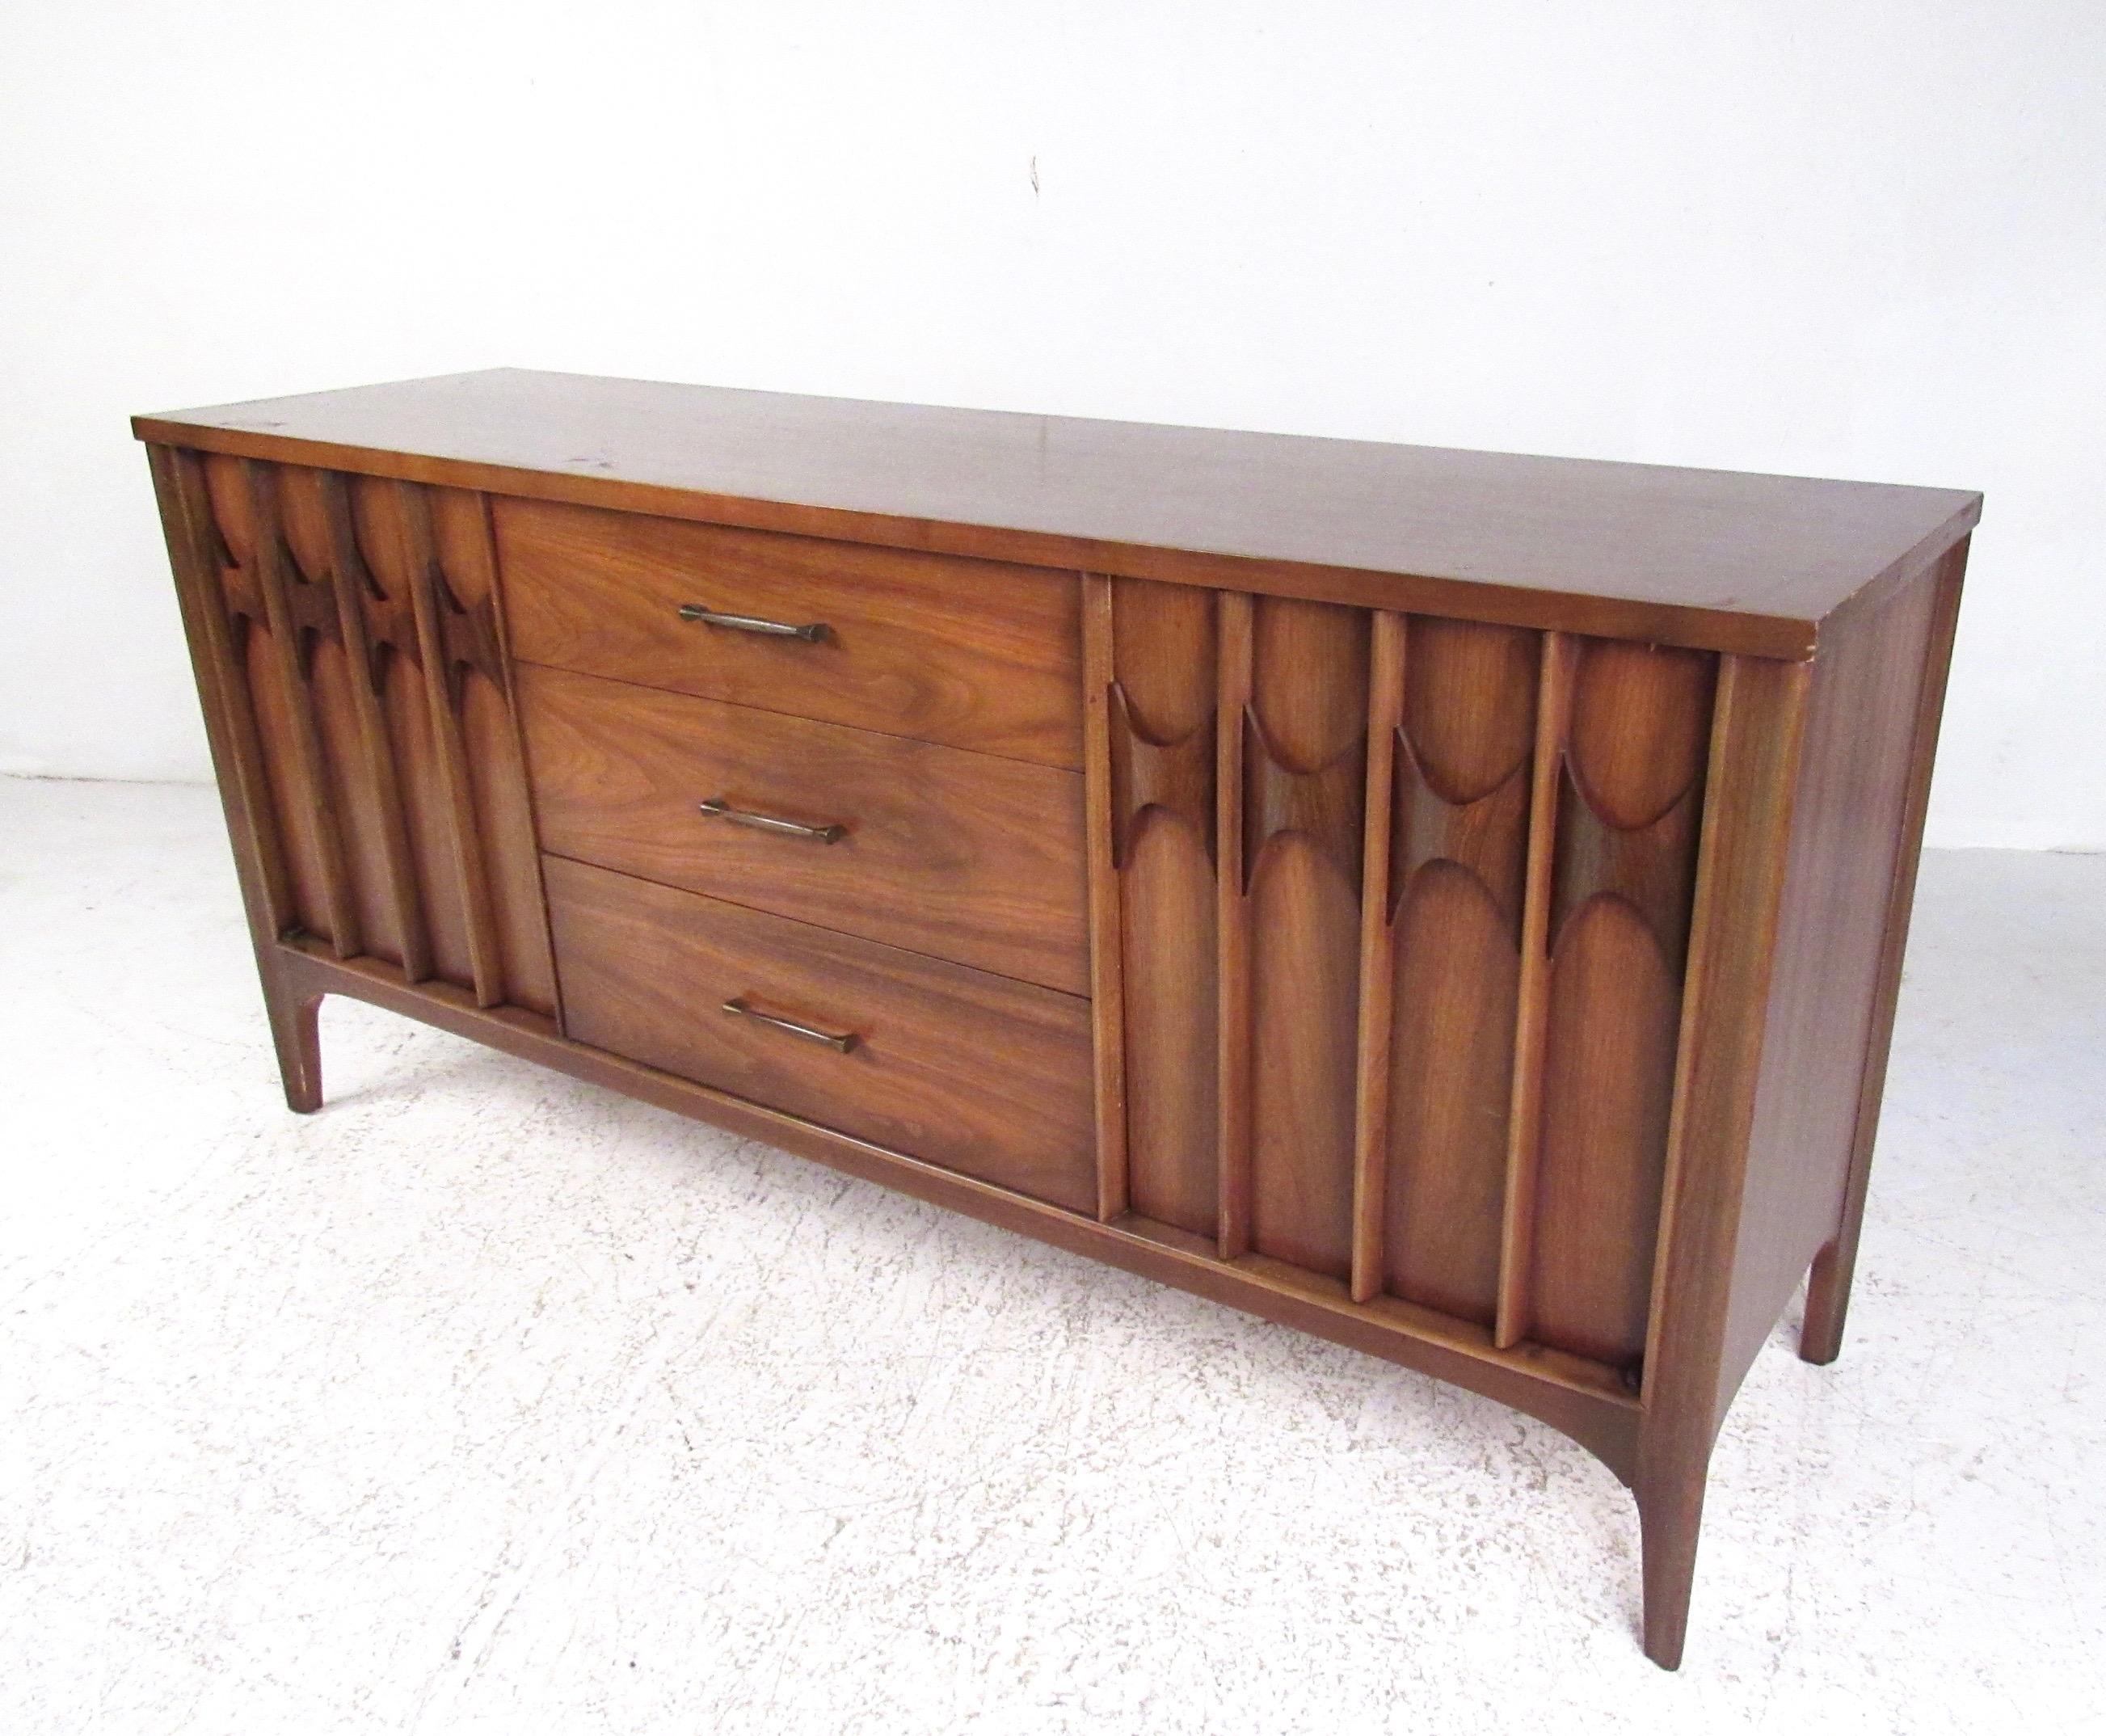 This unique Mid-Century Modern sideboard features walnut finish and a spacious mix of drawers and cabinets for efficient storage at home or office. Brasilia style sculptural door fronts add a unique modernist flair to this elegant storage credenza.